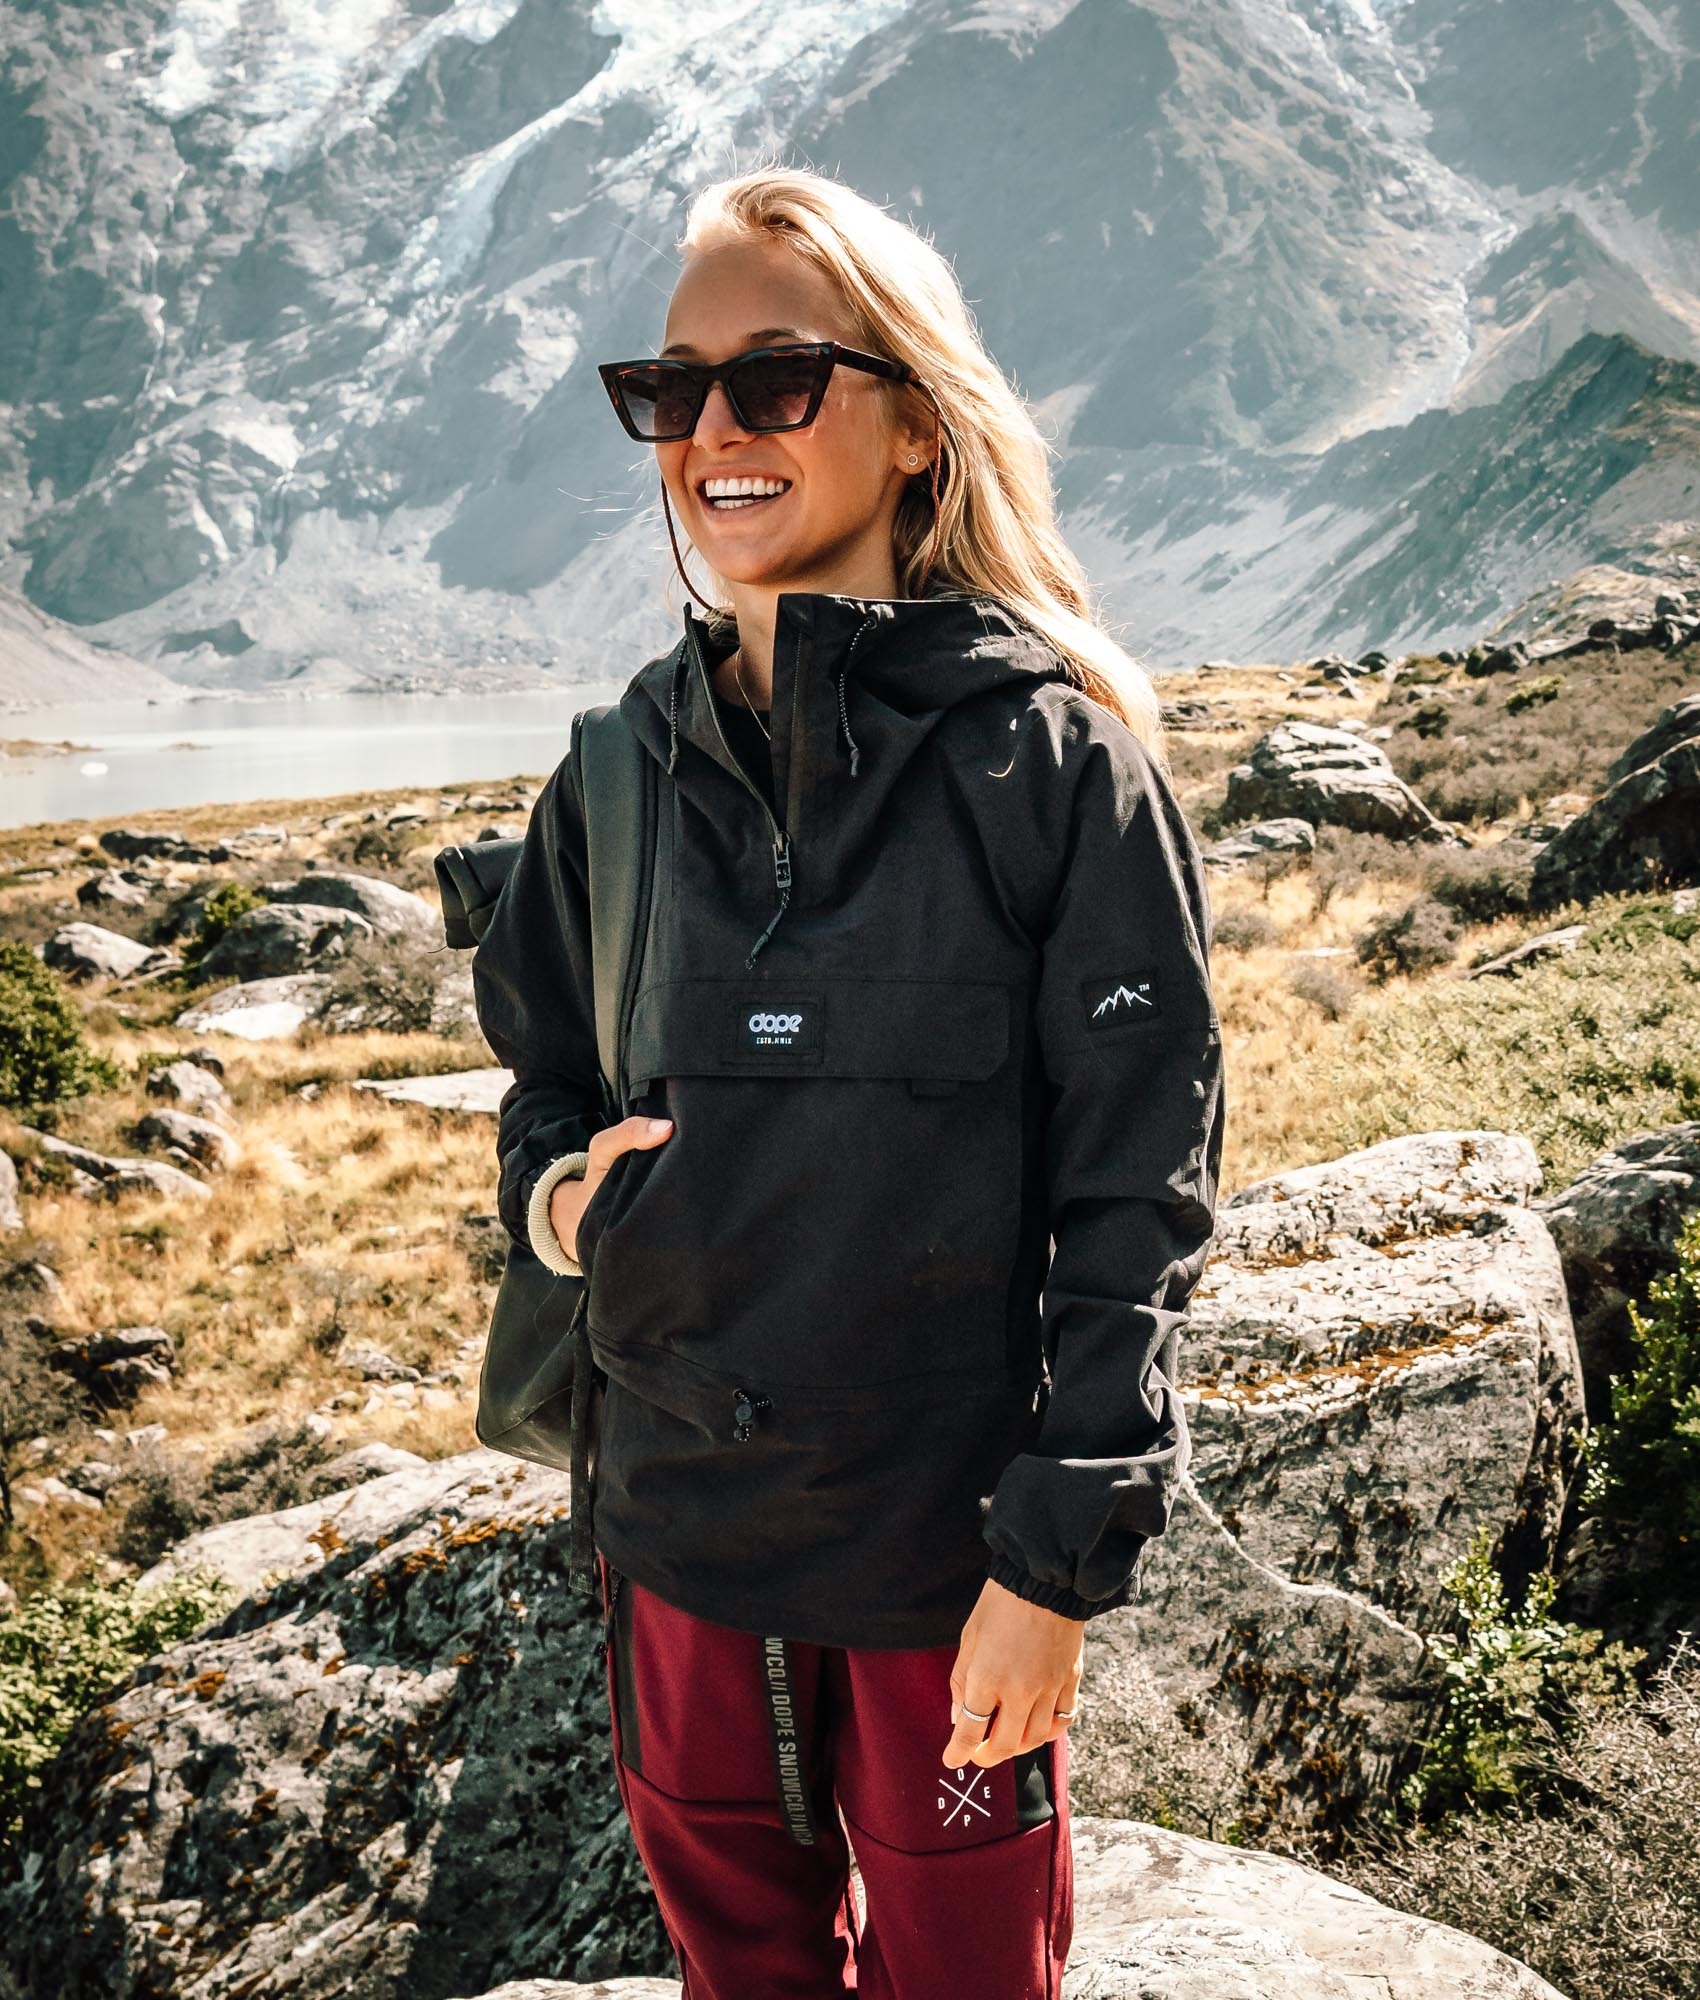 KÜHL Women's Hiking Clothing, Performance and Outdoor Wear